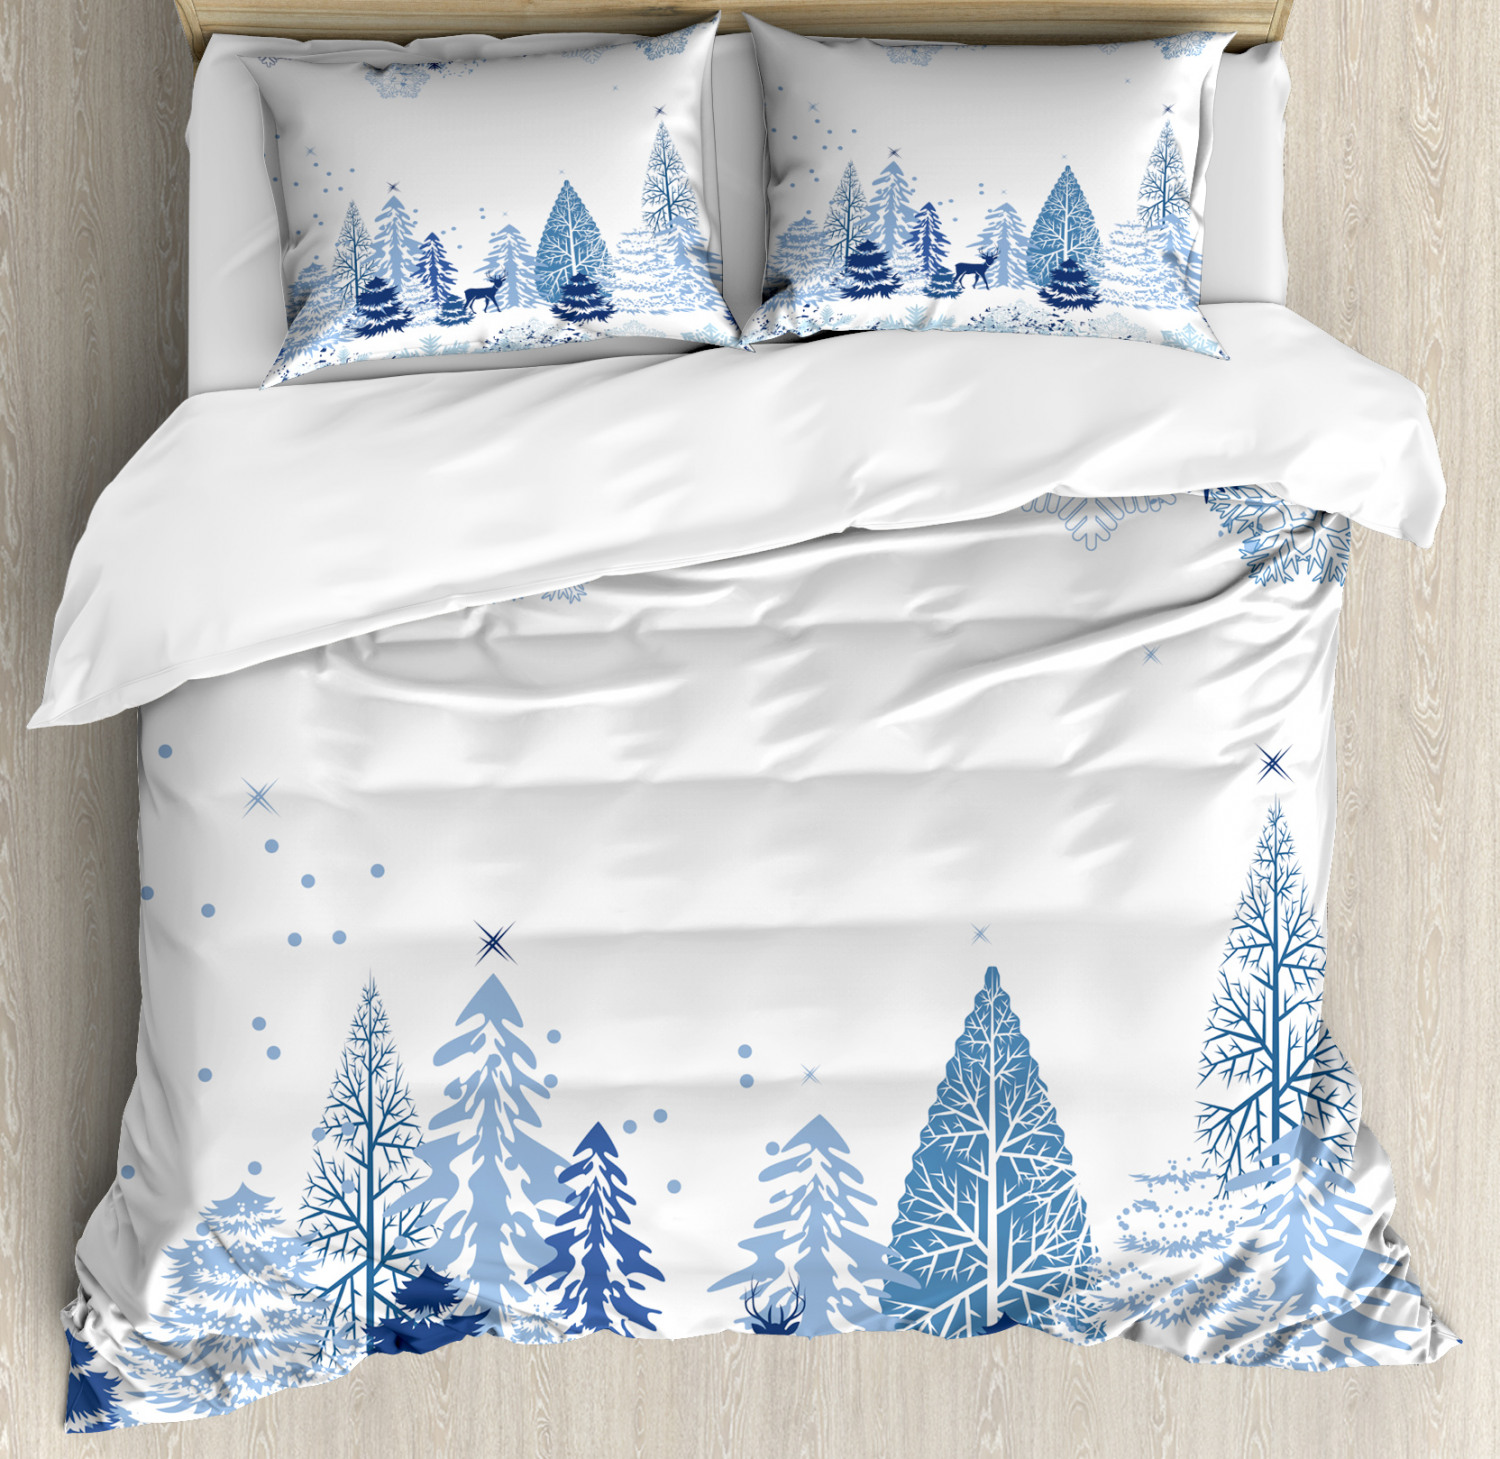 Christmas Duvet Cover Set With Pillow Shams Artsy Winter Forest